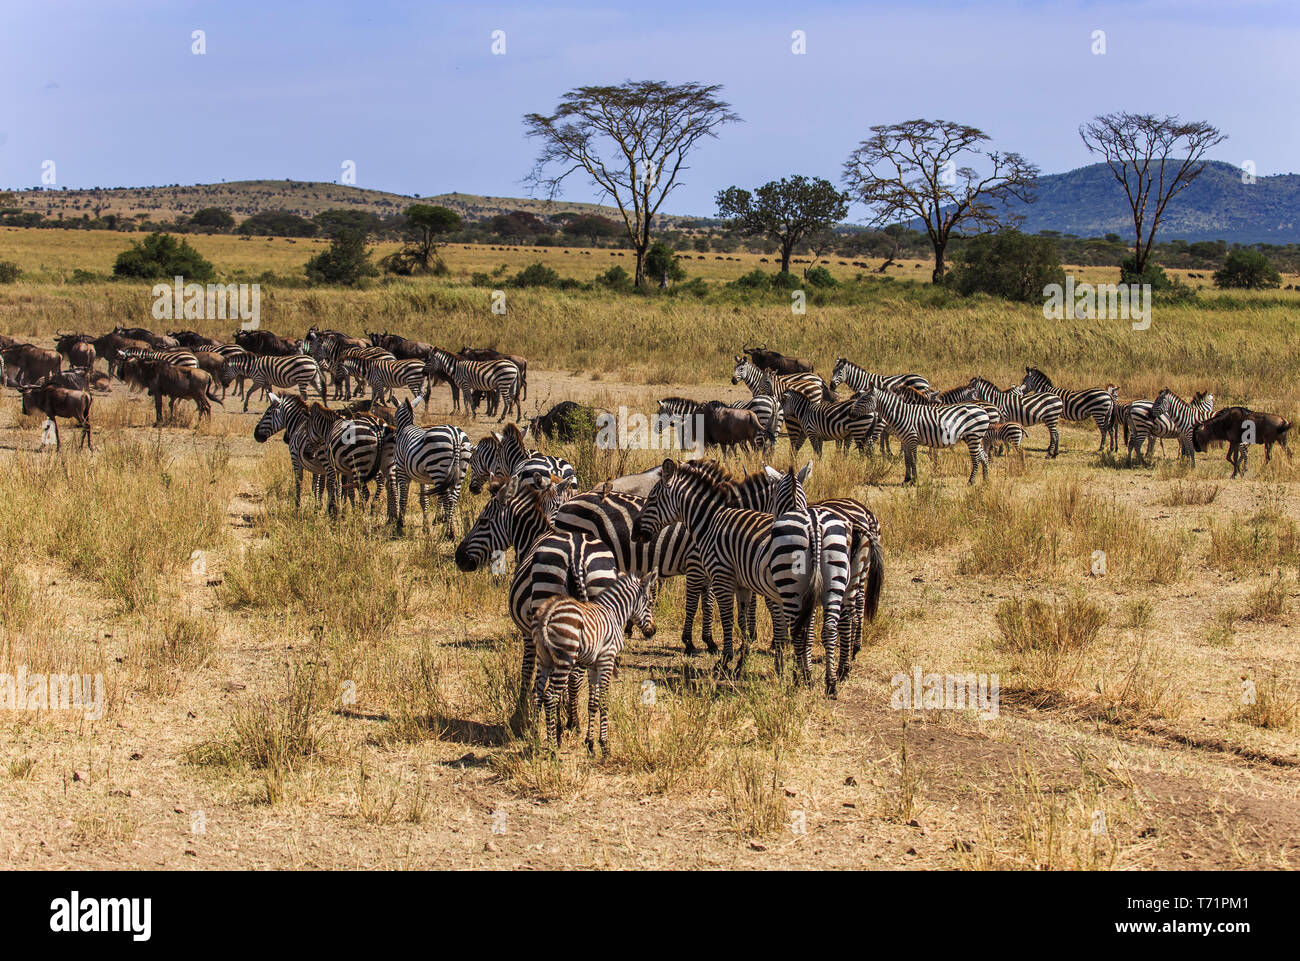 a small herd of migrating zebras and wildebeests walk on an African safari reserve Stock Photo